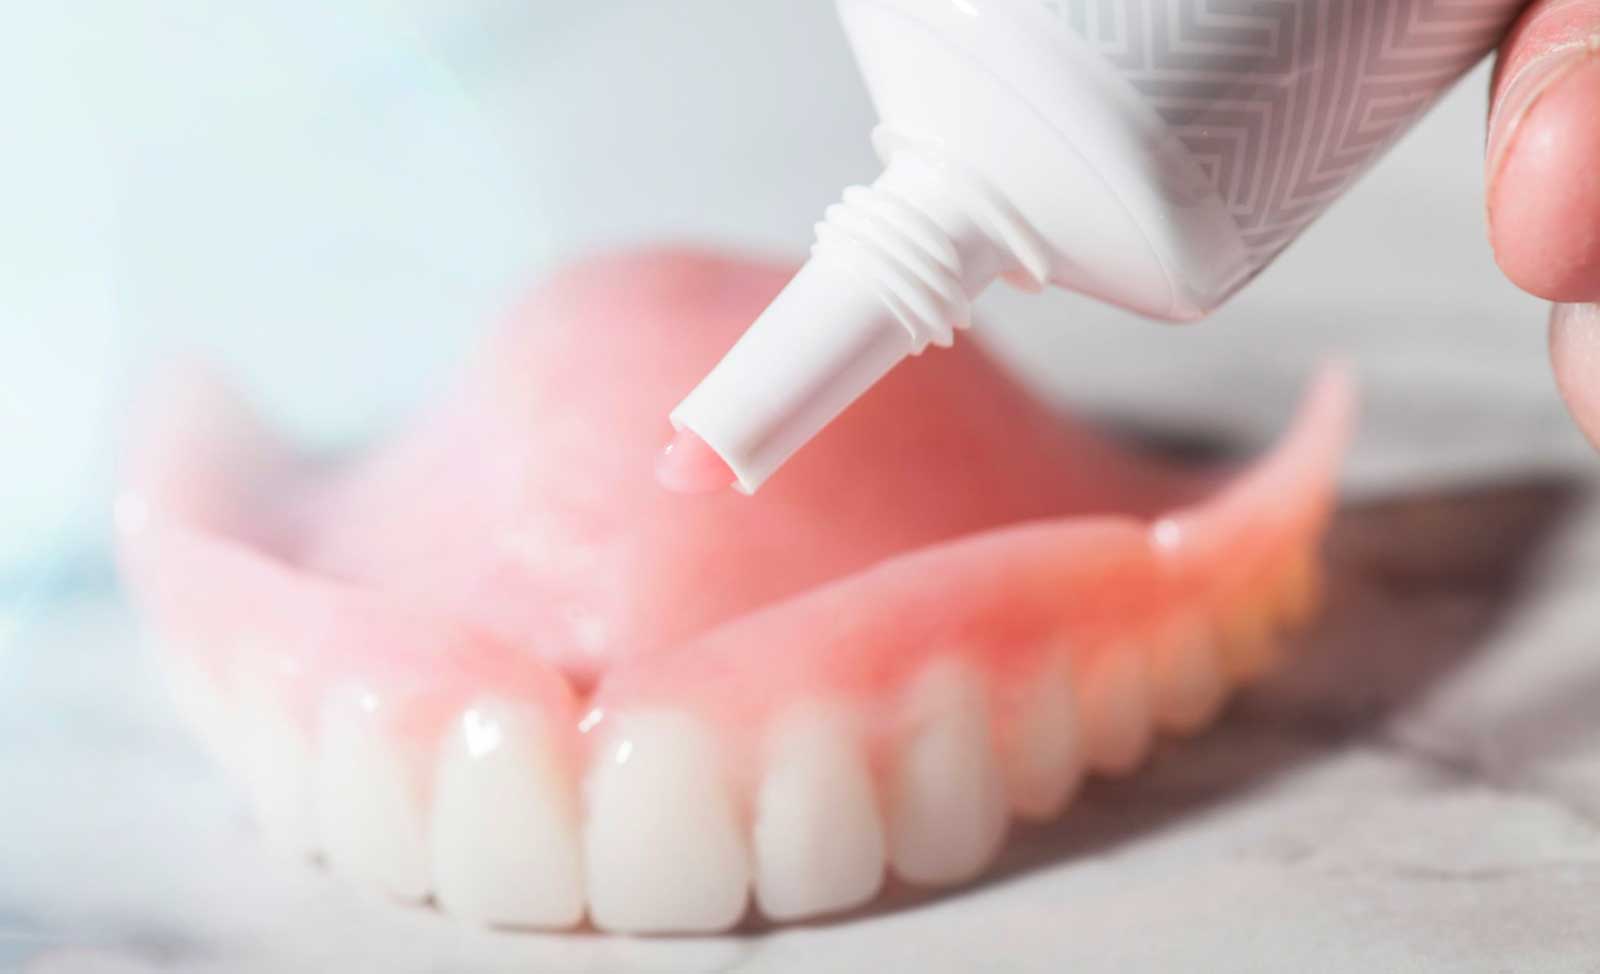 A Denture Adhesive that Improves the Fit and Comfort of Your